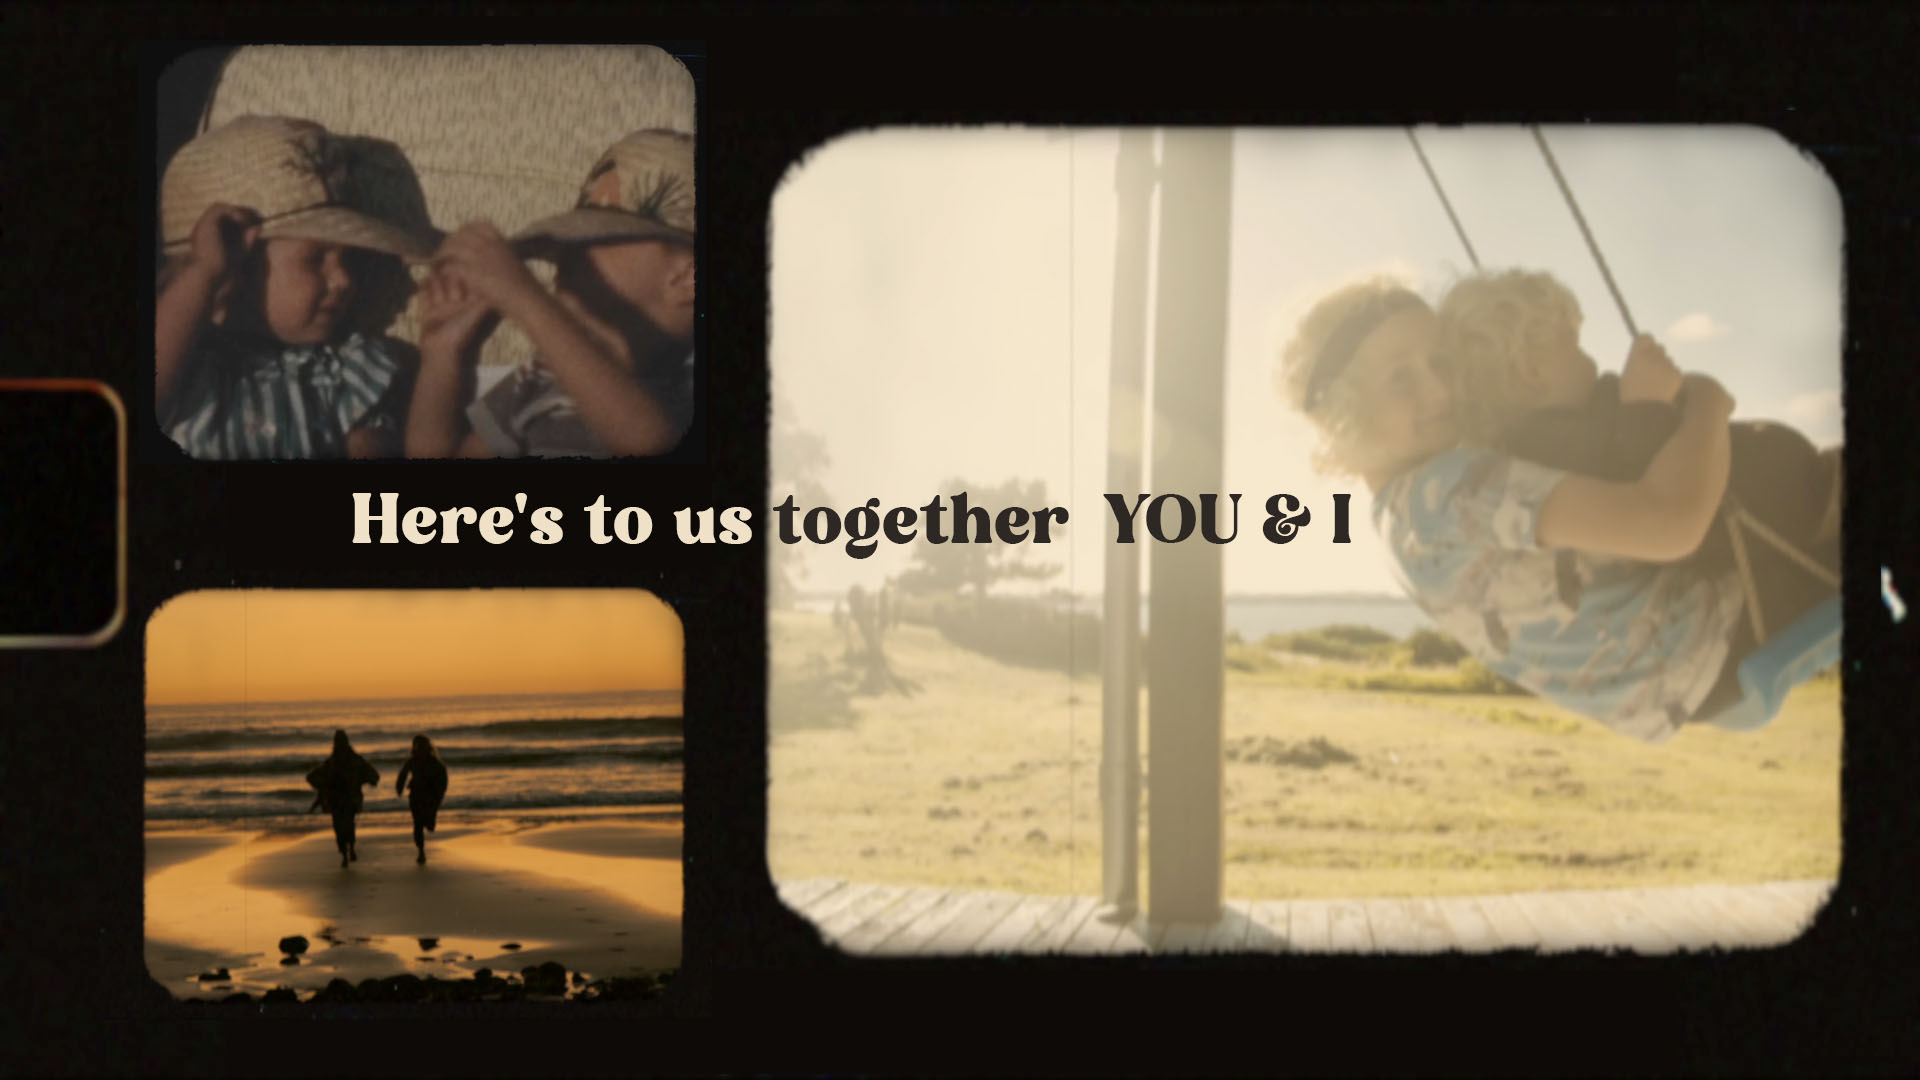 Jon Foreman "I Propose a Toast" Video Pictures of children and friends. With lyrics "Here's to us together you and I."